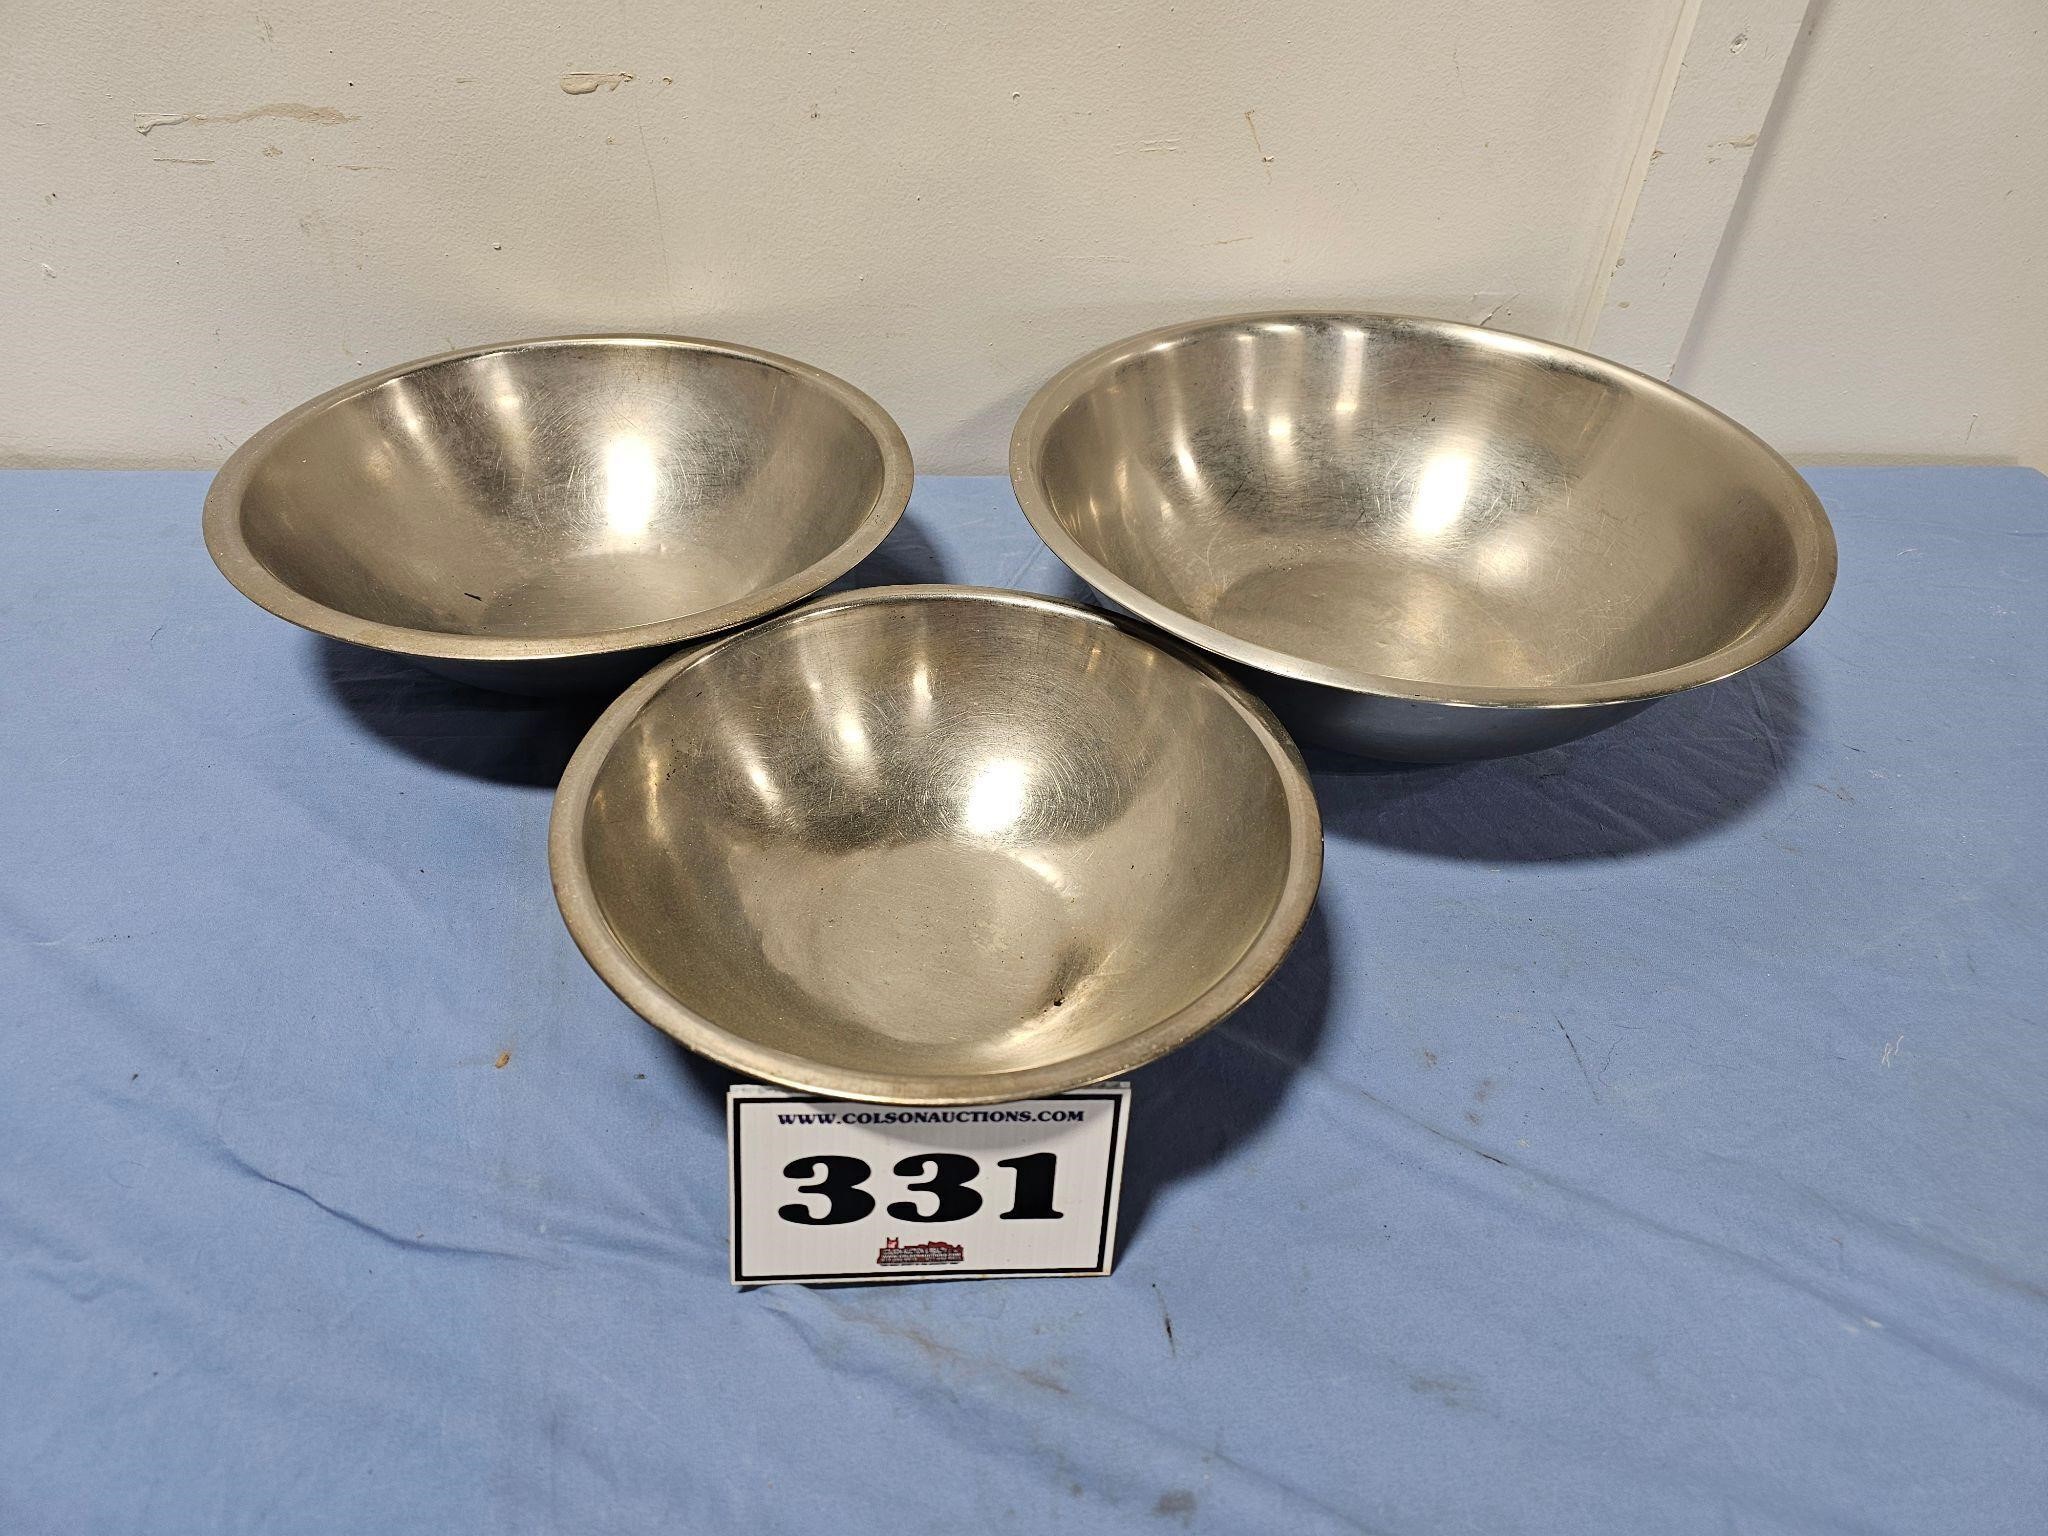 mixing bowls or chicken feeders